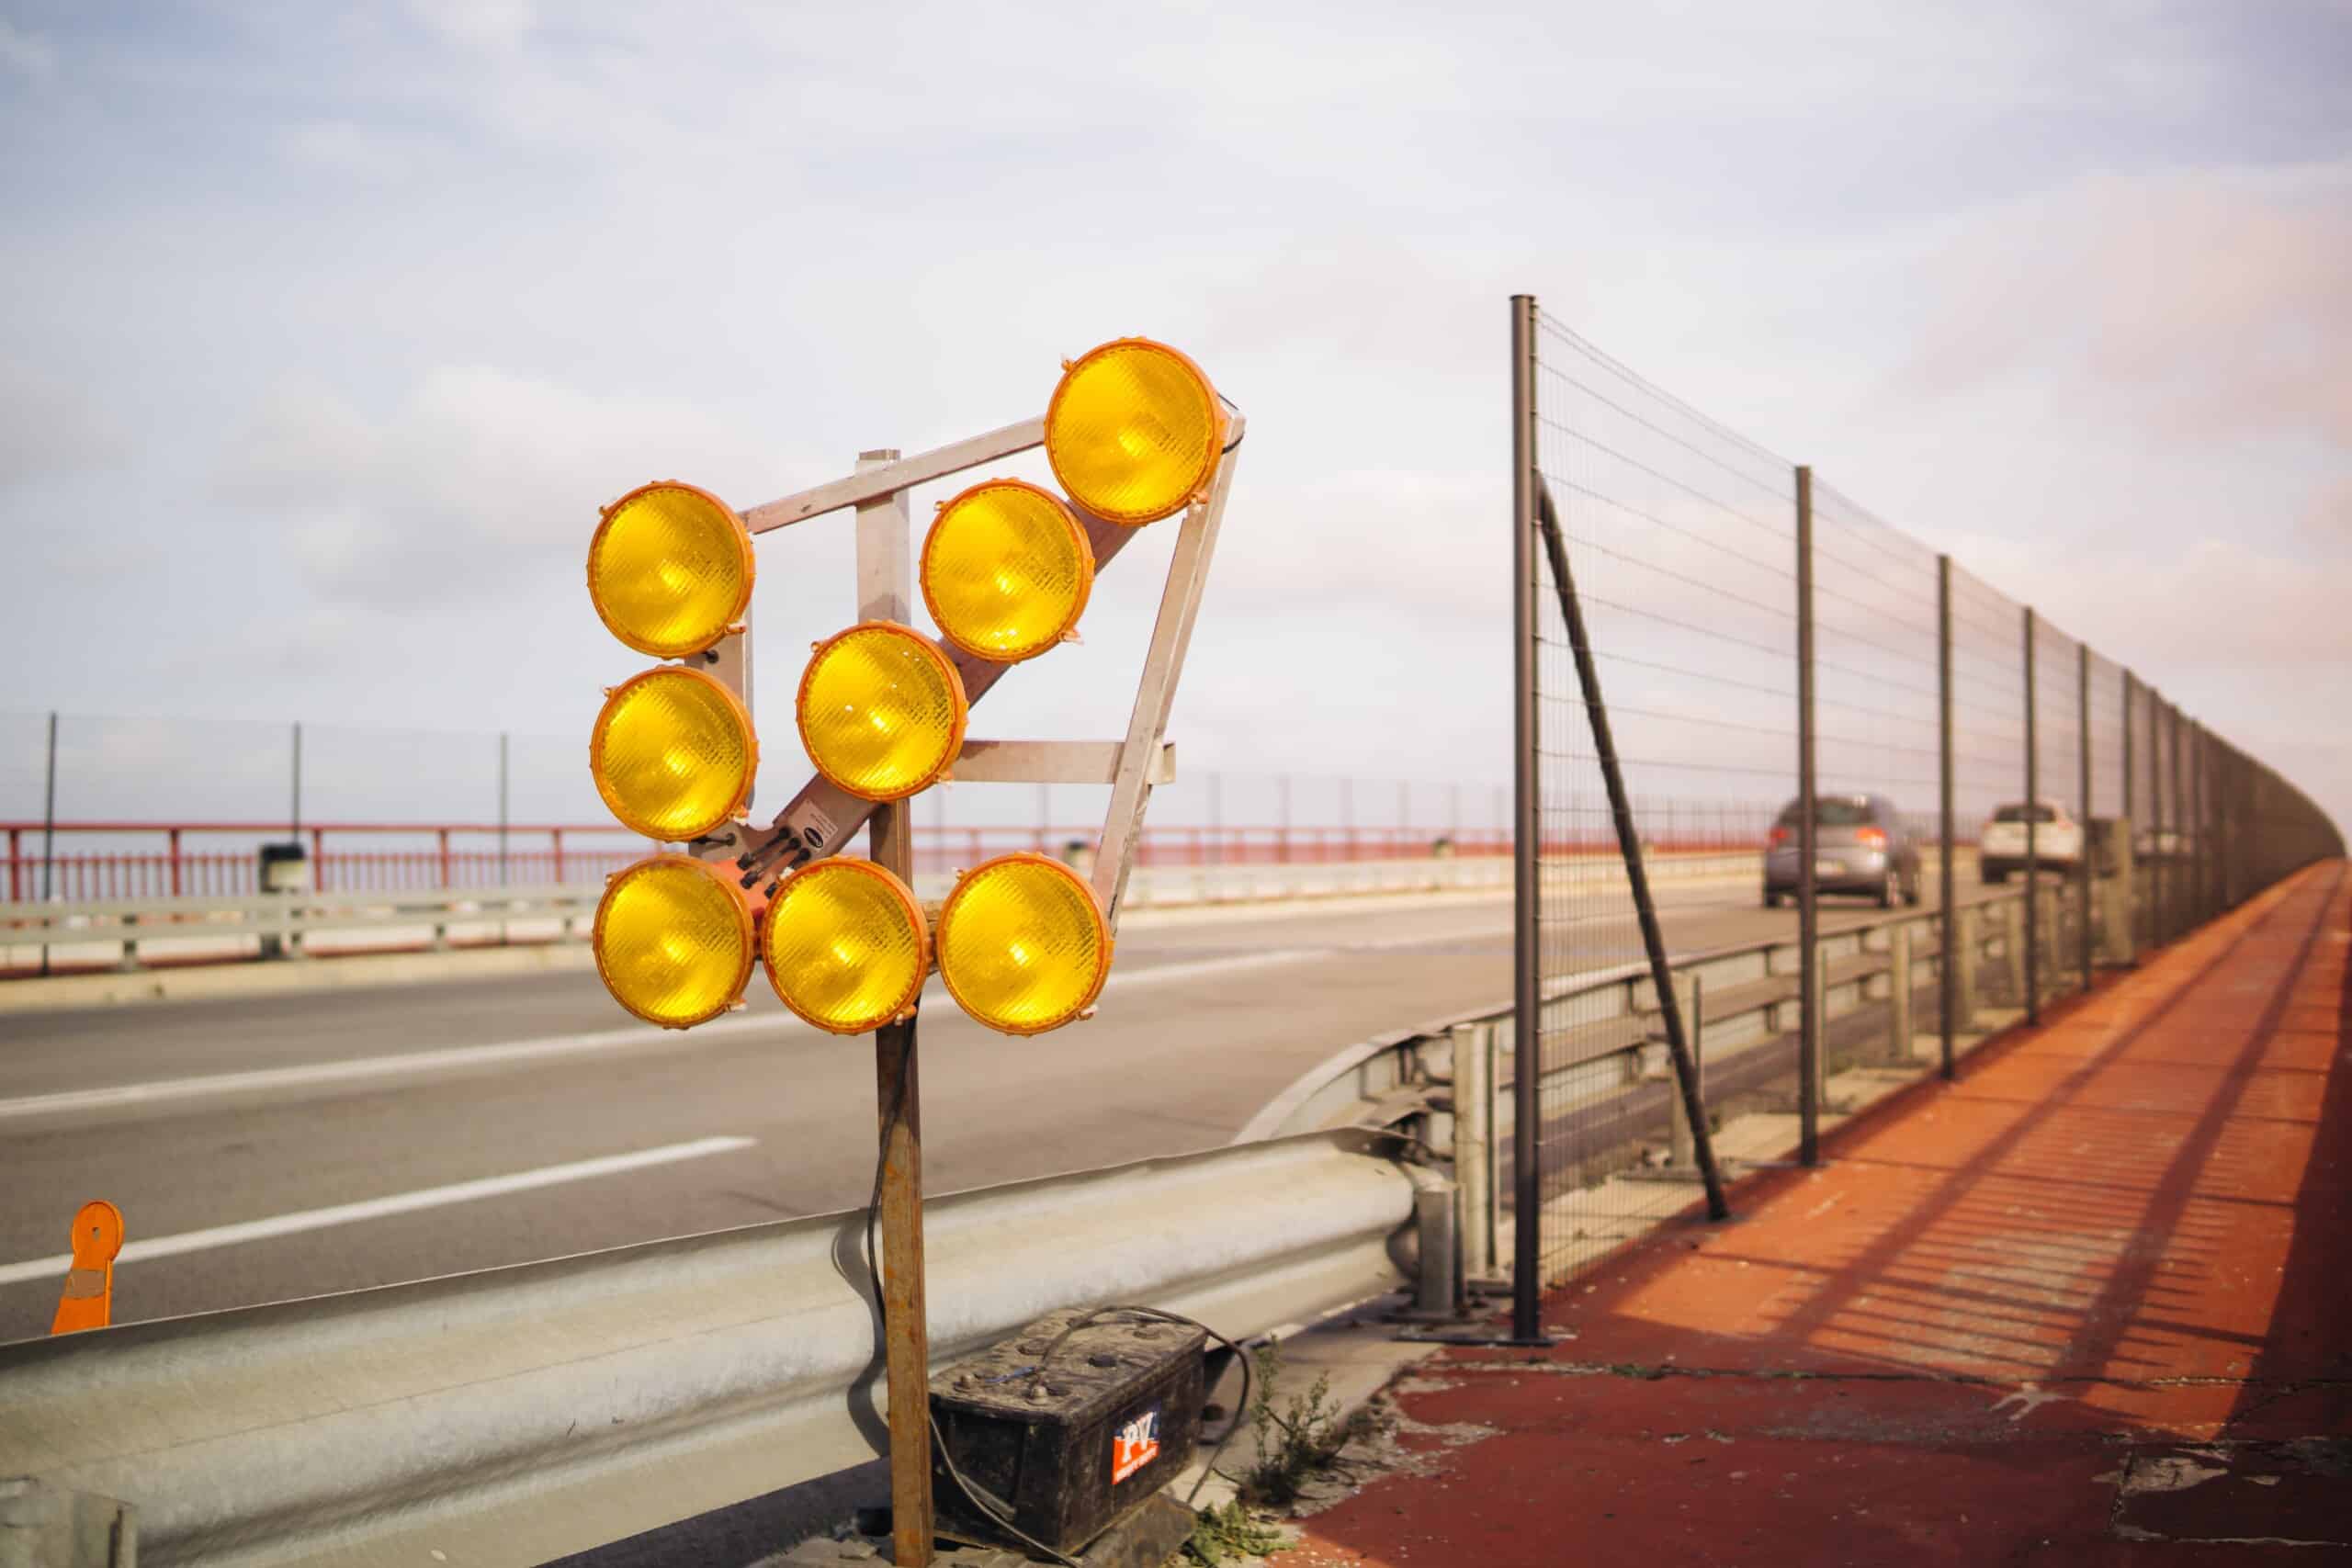 A global company has installed yellow traffic lights on the side of a road.